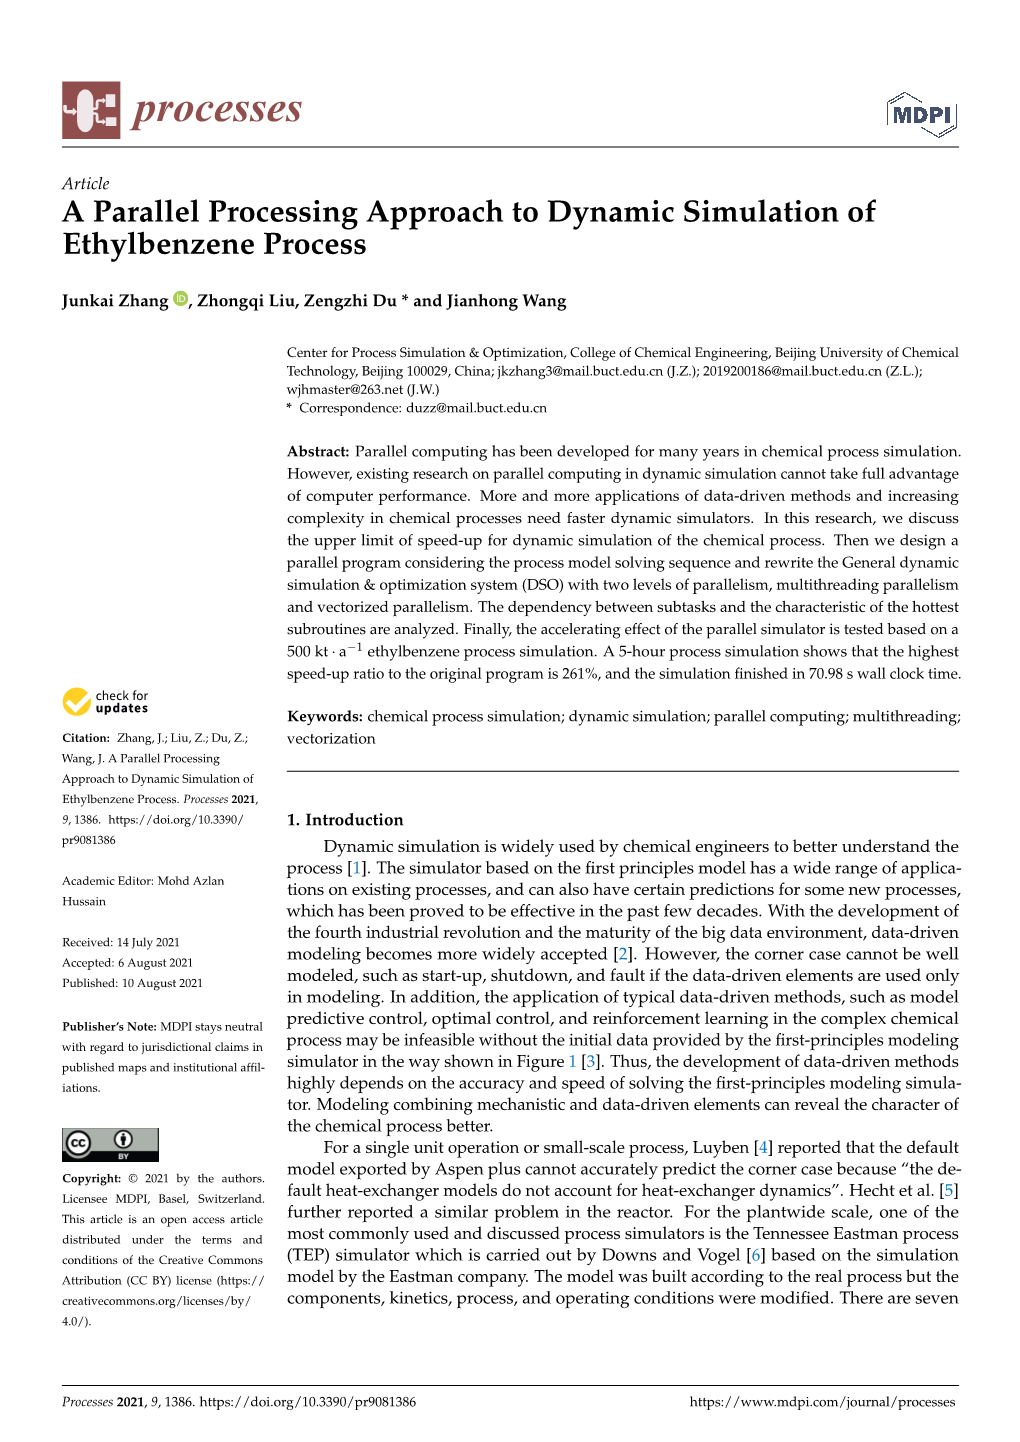 A Parallel Processing Approach to Dynamic Simulation of Ethylbenzene Process